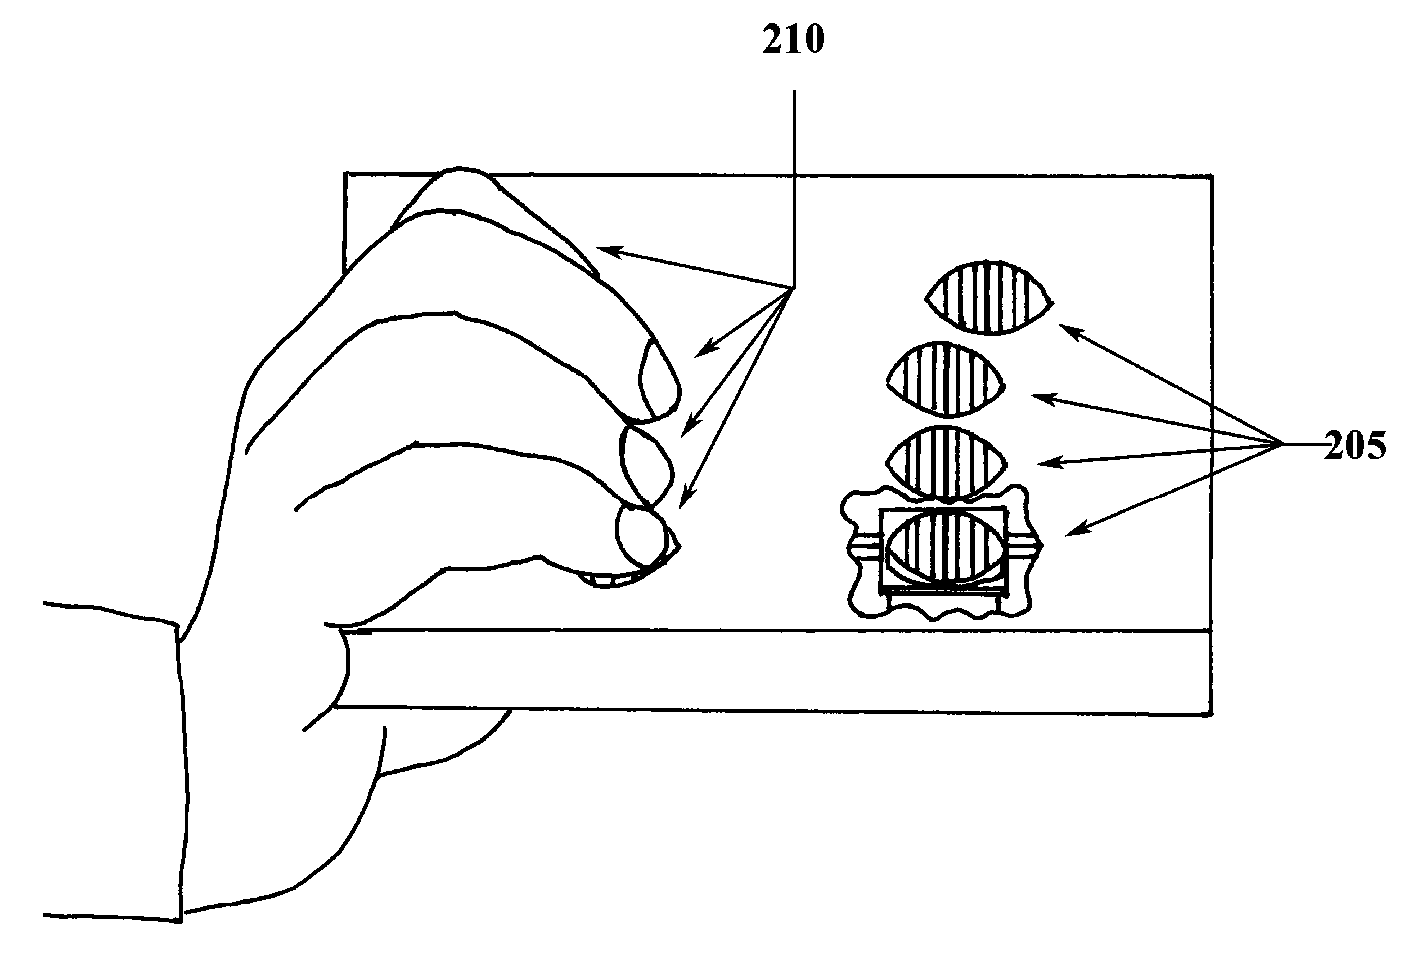 Rapid Typing System for a Hand-held Electronic Device